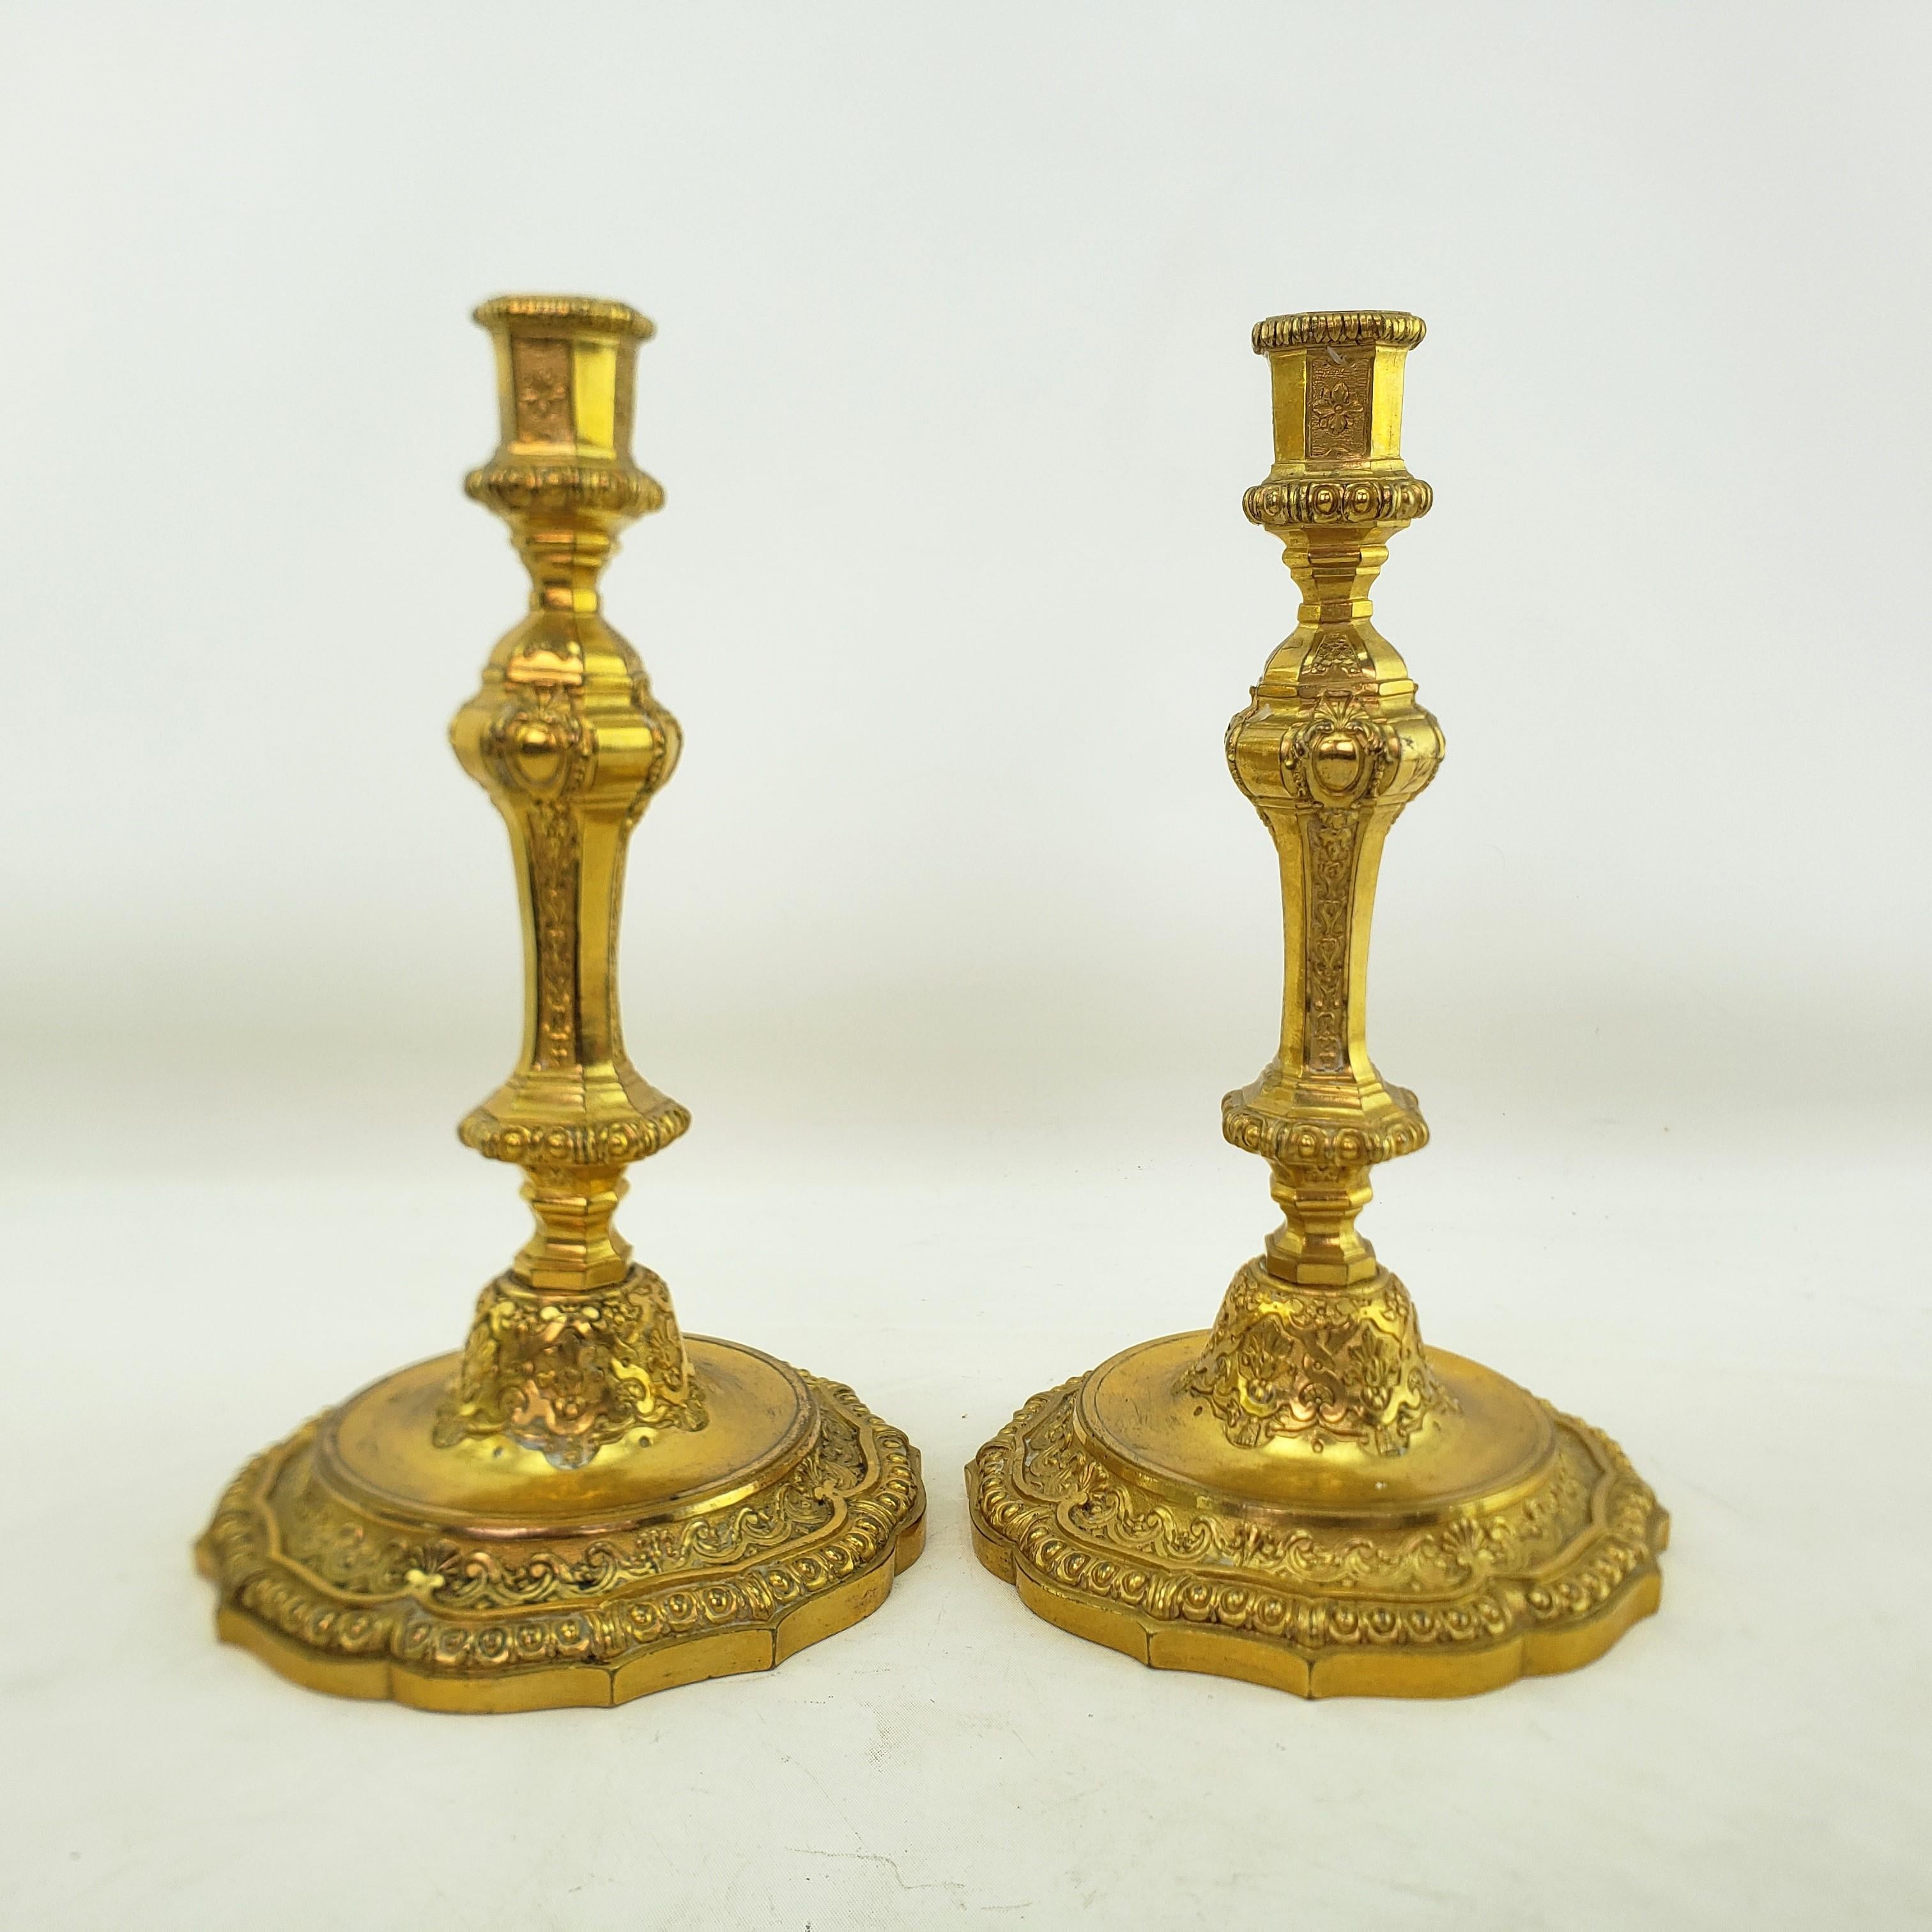 Pair of Antique Louis XIV Styled Gilt Bronze Candlesticks with Stylized Flowers In Good Condition For Sale In Hamilton, Ontario